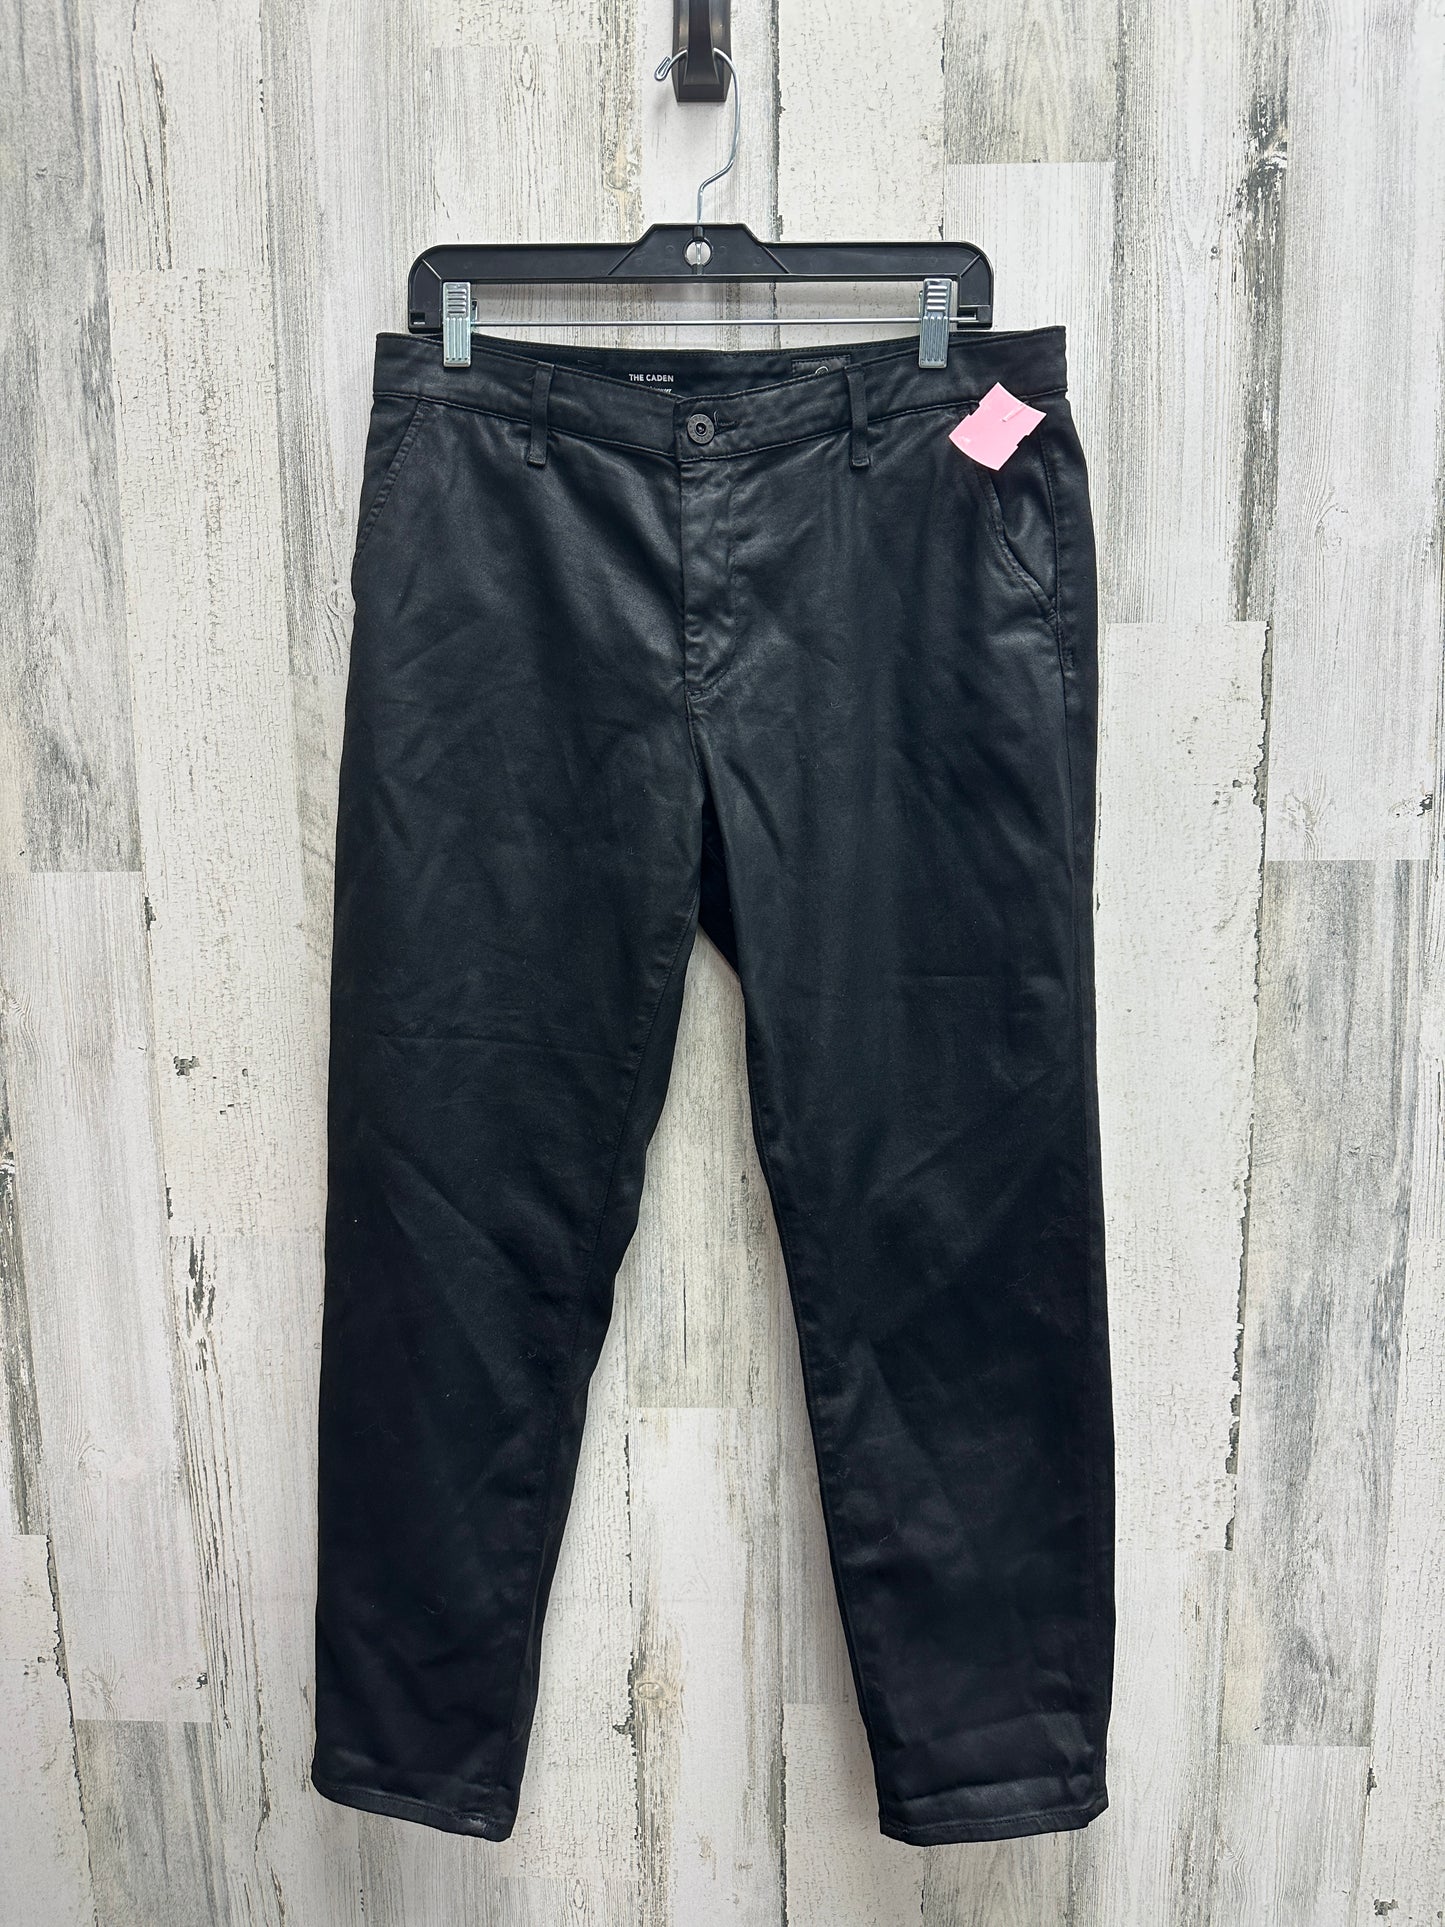 Pants Ankle By Adriano Goldschmied  Size: 10